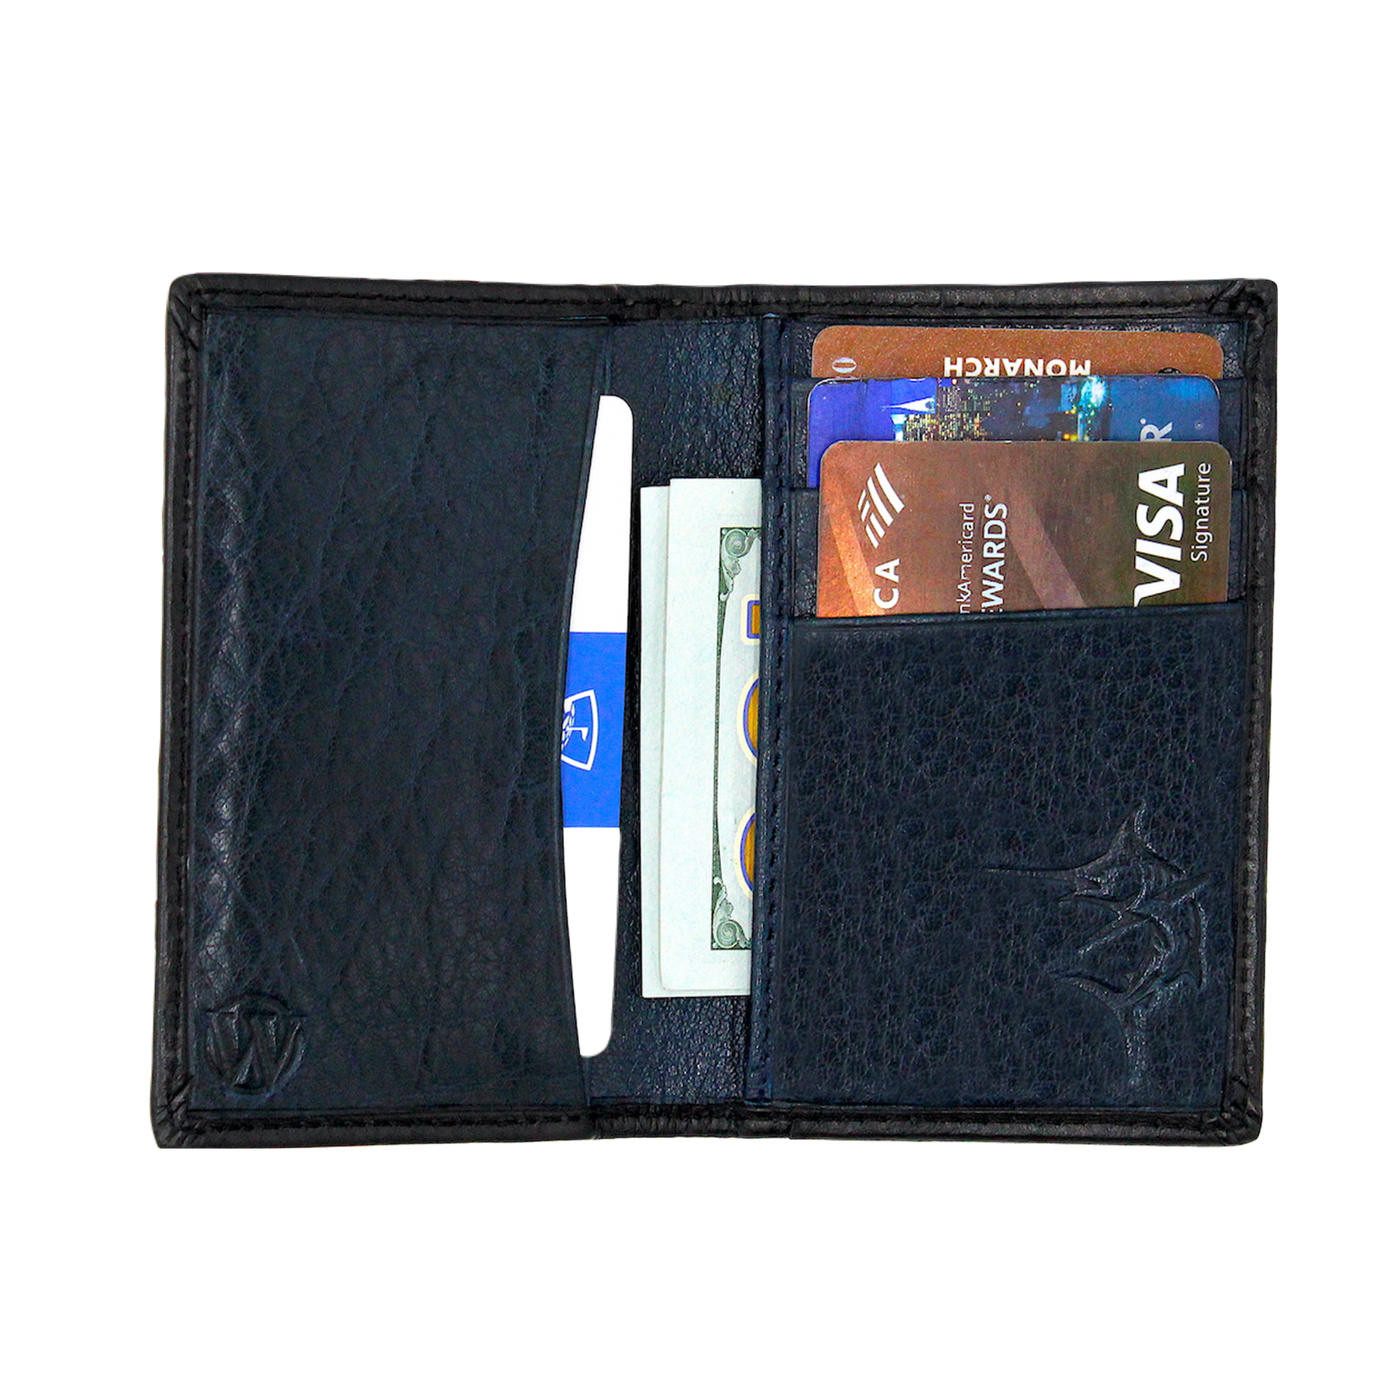 The Pursuit Front Pocket Duo-Fold Marlin Wallet, a perfect gift for any angler, provides a debossed marlin on the inner and outer corner along with a bold hand-dyed colored, premier full grain leather. Stylish for any collection. 4 Card Slots 2 Interior Pockets Exterior Easy Access Pocket Slim Minimalist & Modern Design Dimensions: 4.3"L x 3"H RFID Protection Color: Black | Ocean